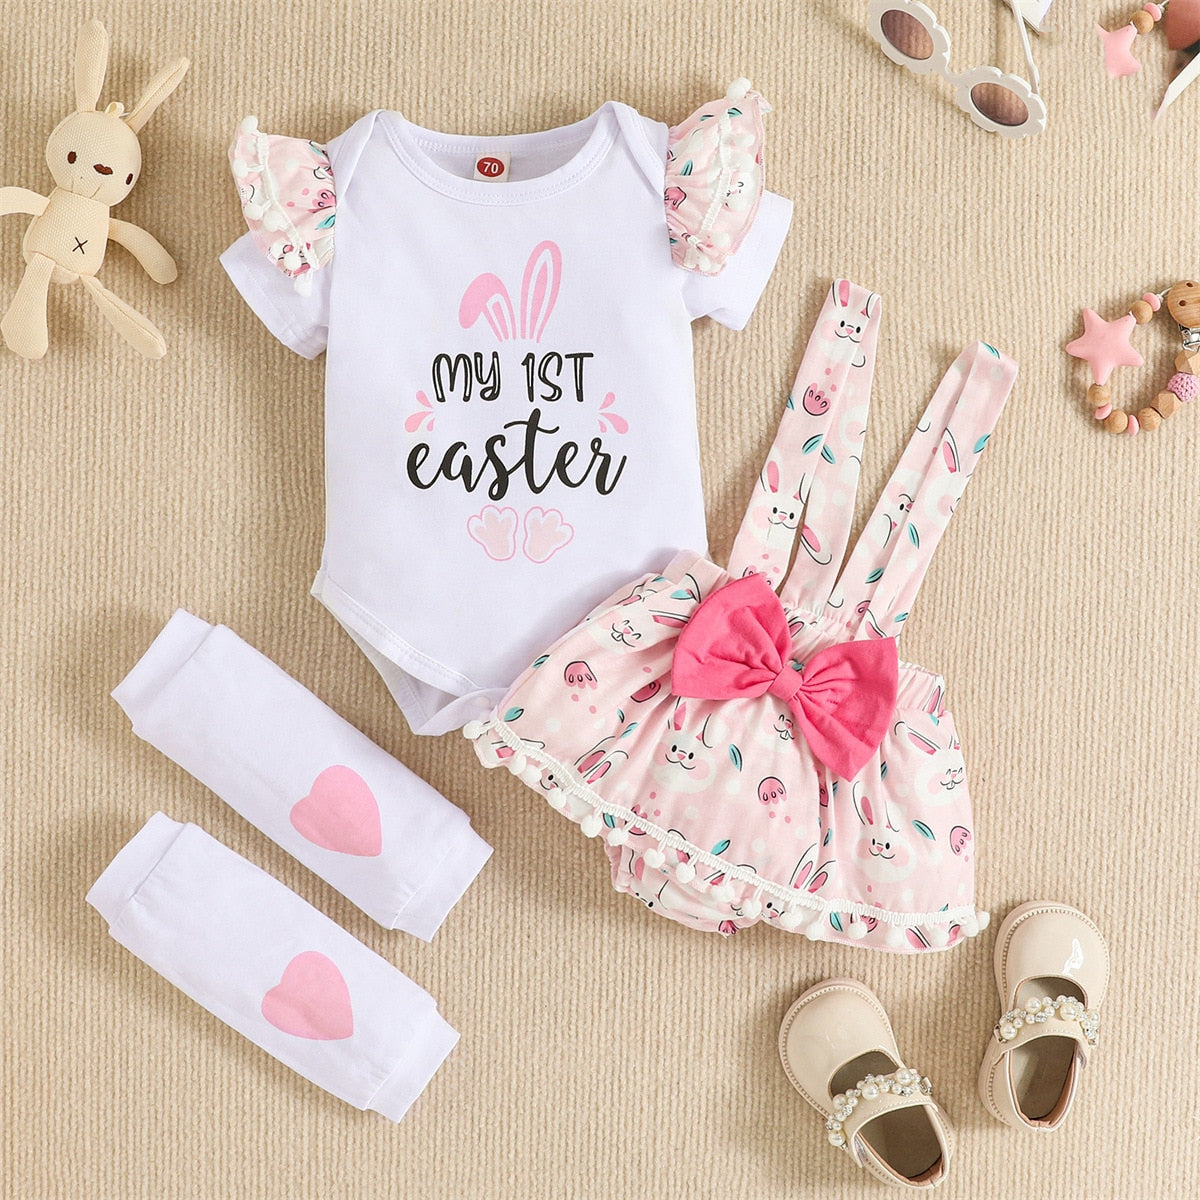 My First Easter" Baby Clothing Set for Girls: Rabbit Romper and Layered Floral Bodysuit